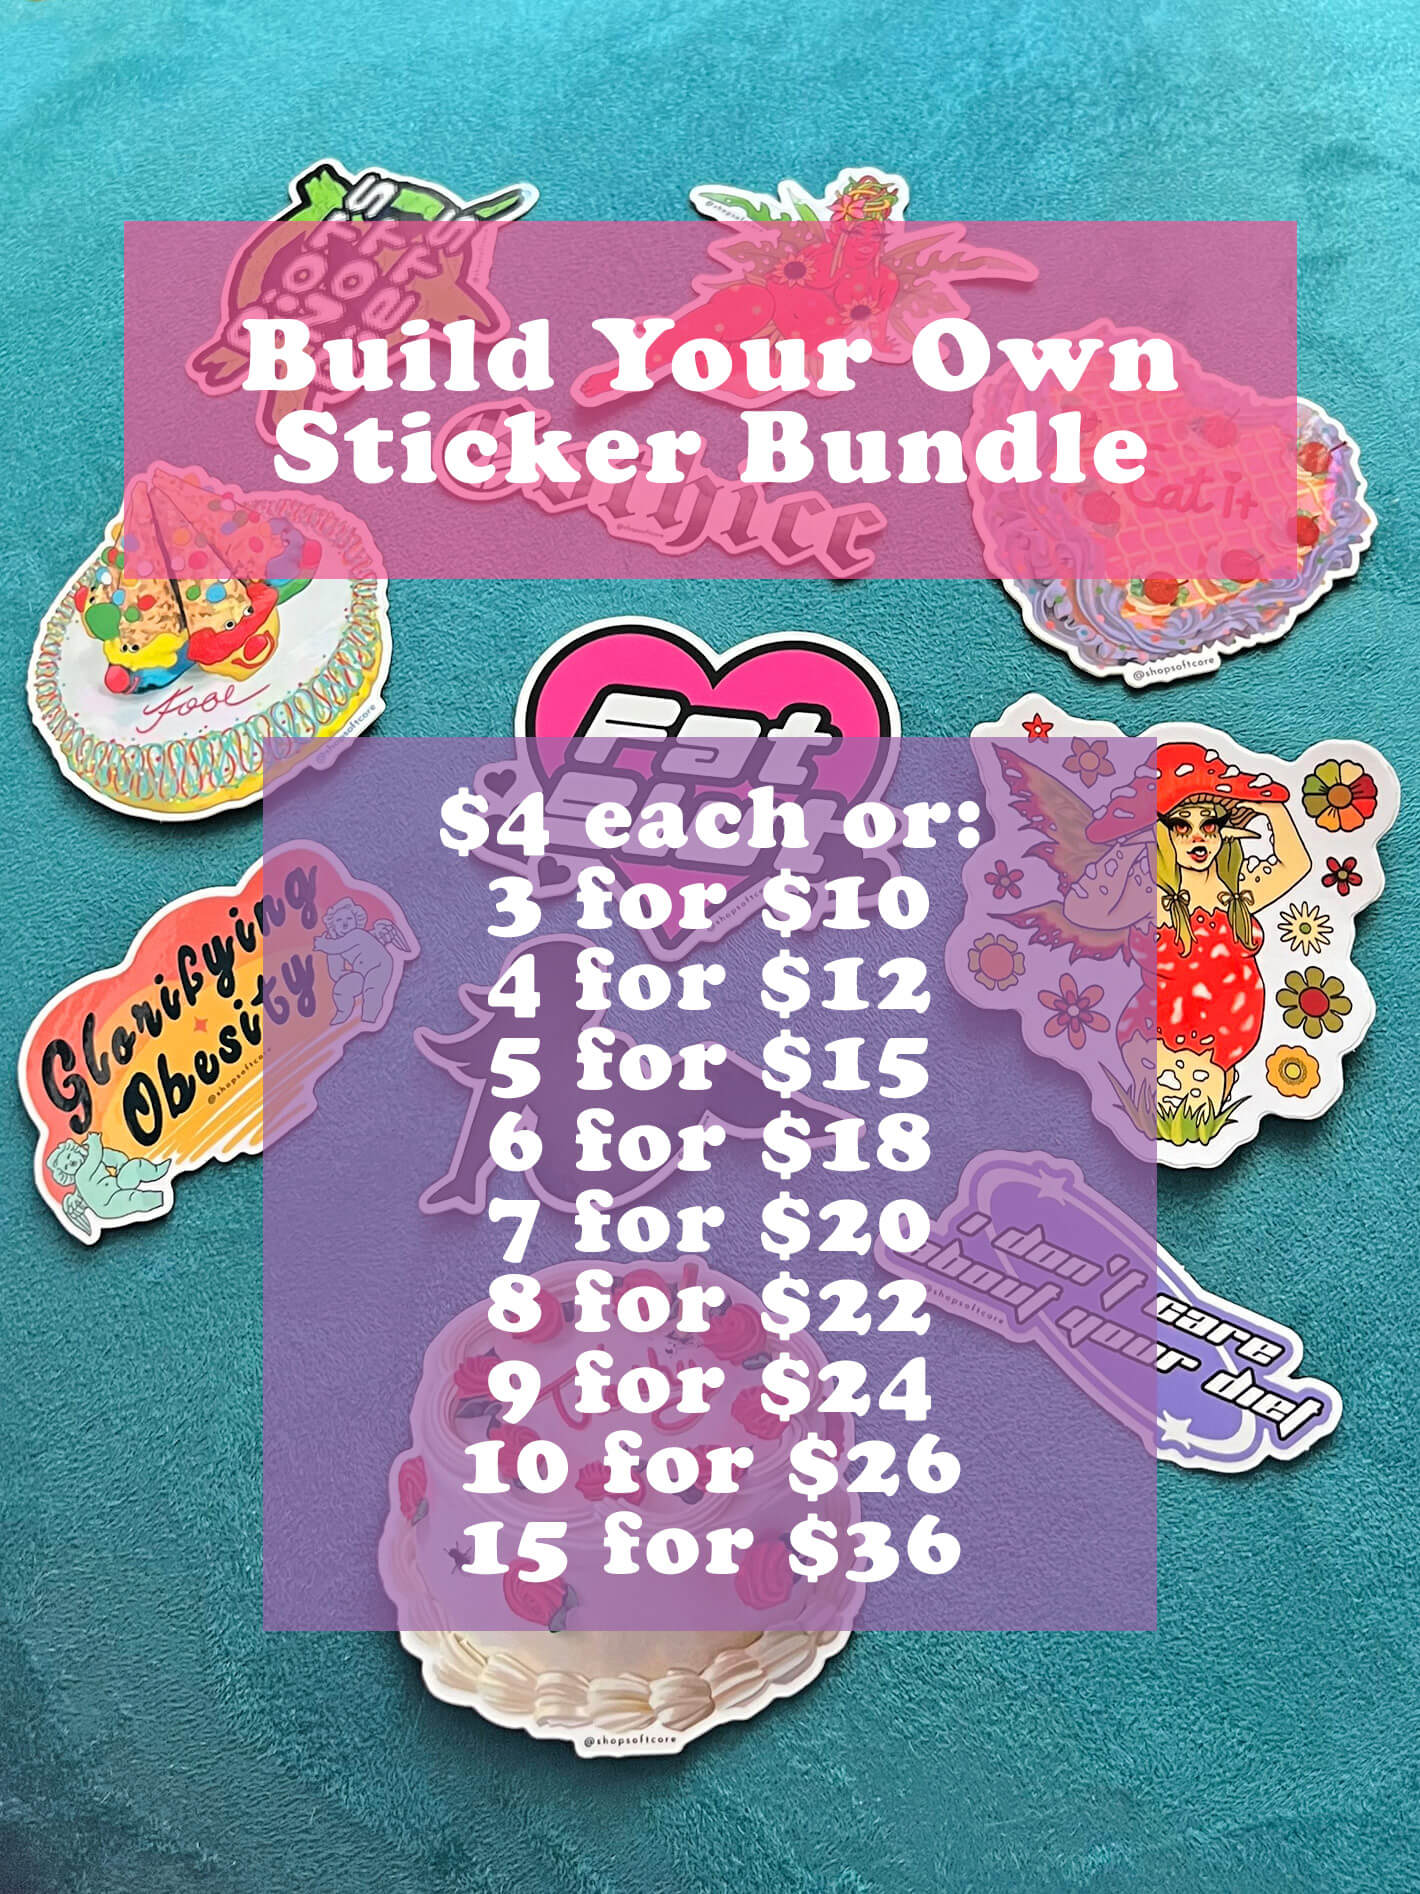 Build your own sticker bundle. $4 each or: 3 for $10 4 for $12 5 for $15 6 for $18 7 for $20 8 for $22 9 for $24 10 for $26 15 for $36.